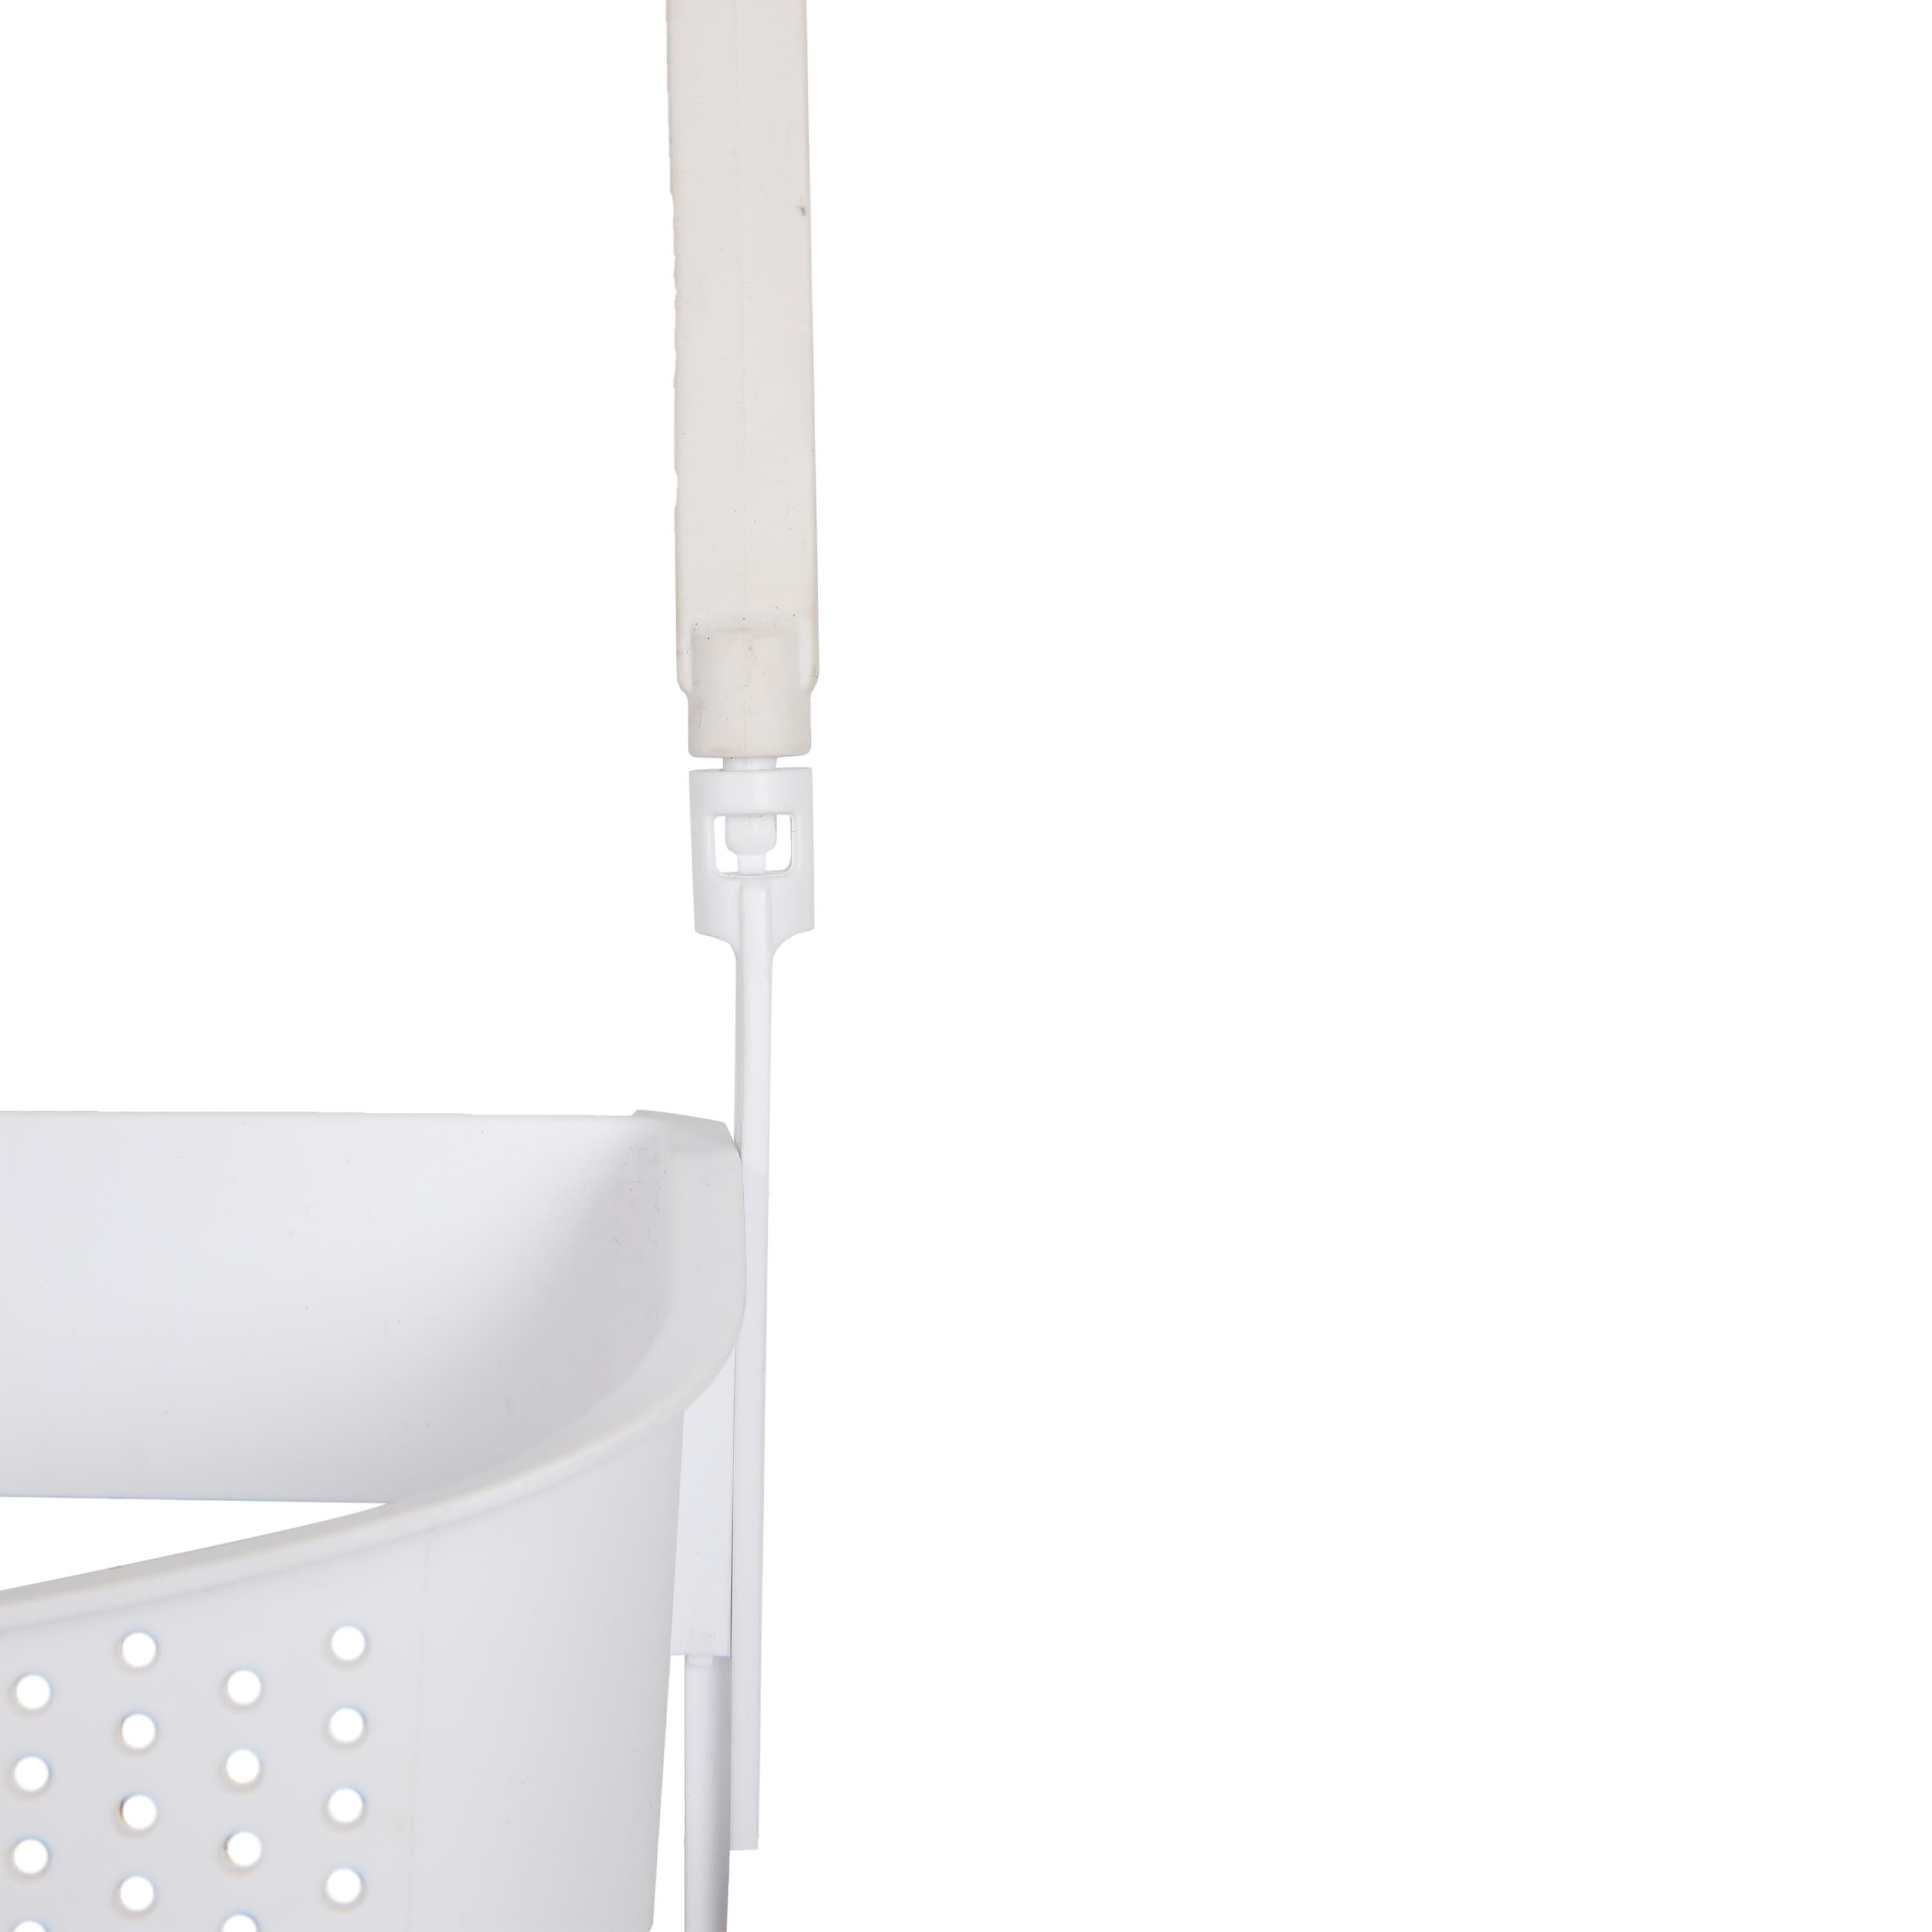 Wholesale 18 White 2 Tier Shower Caddy WHITE